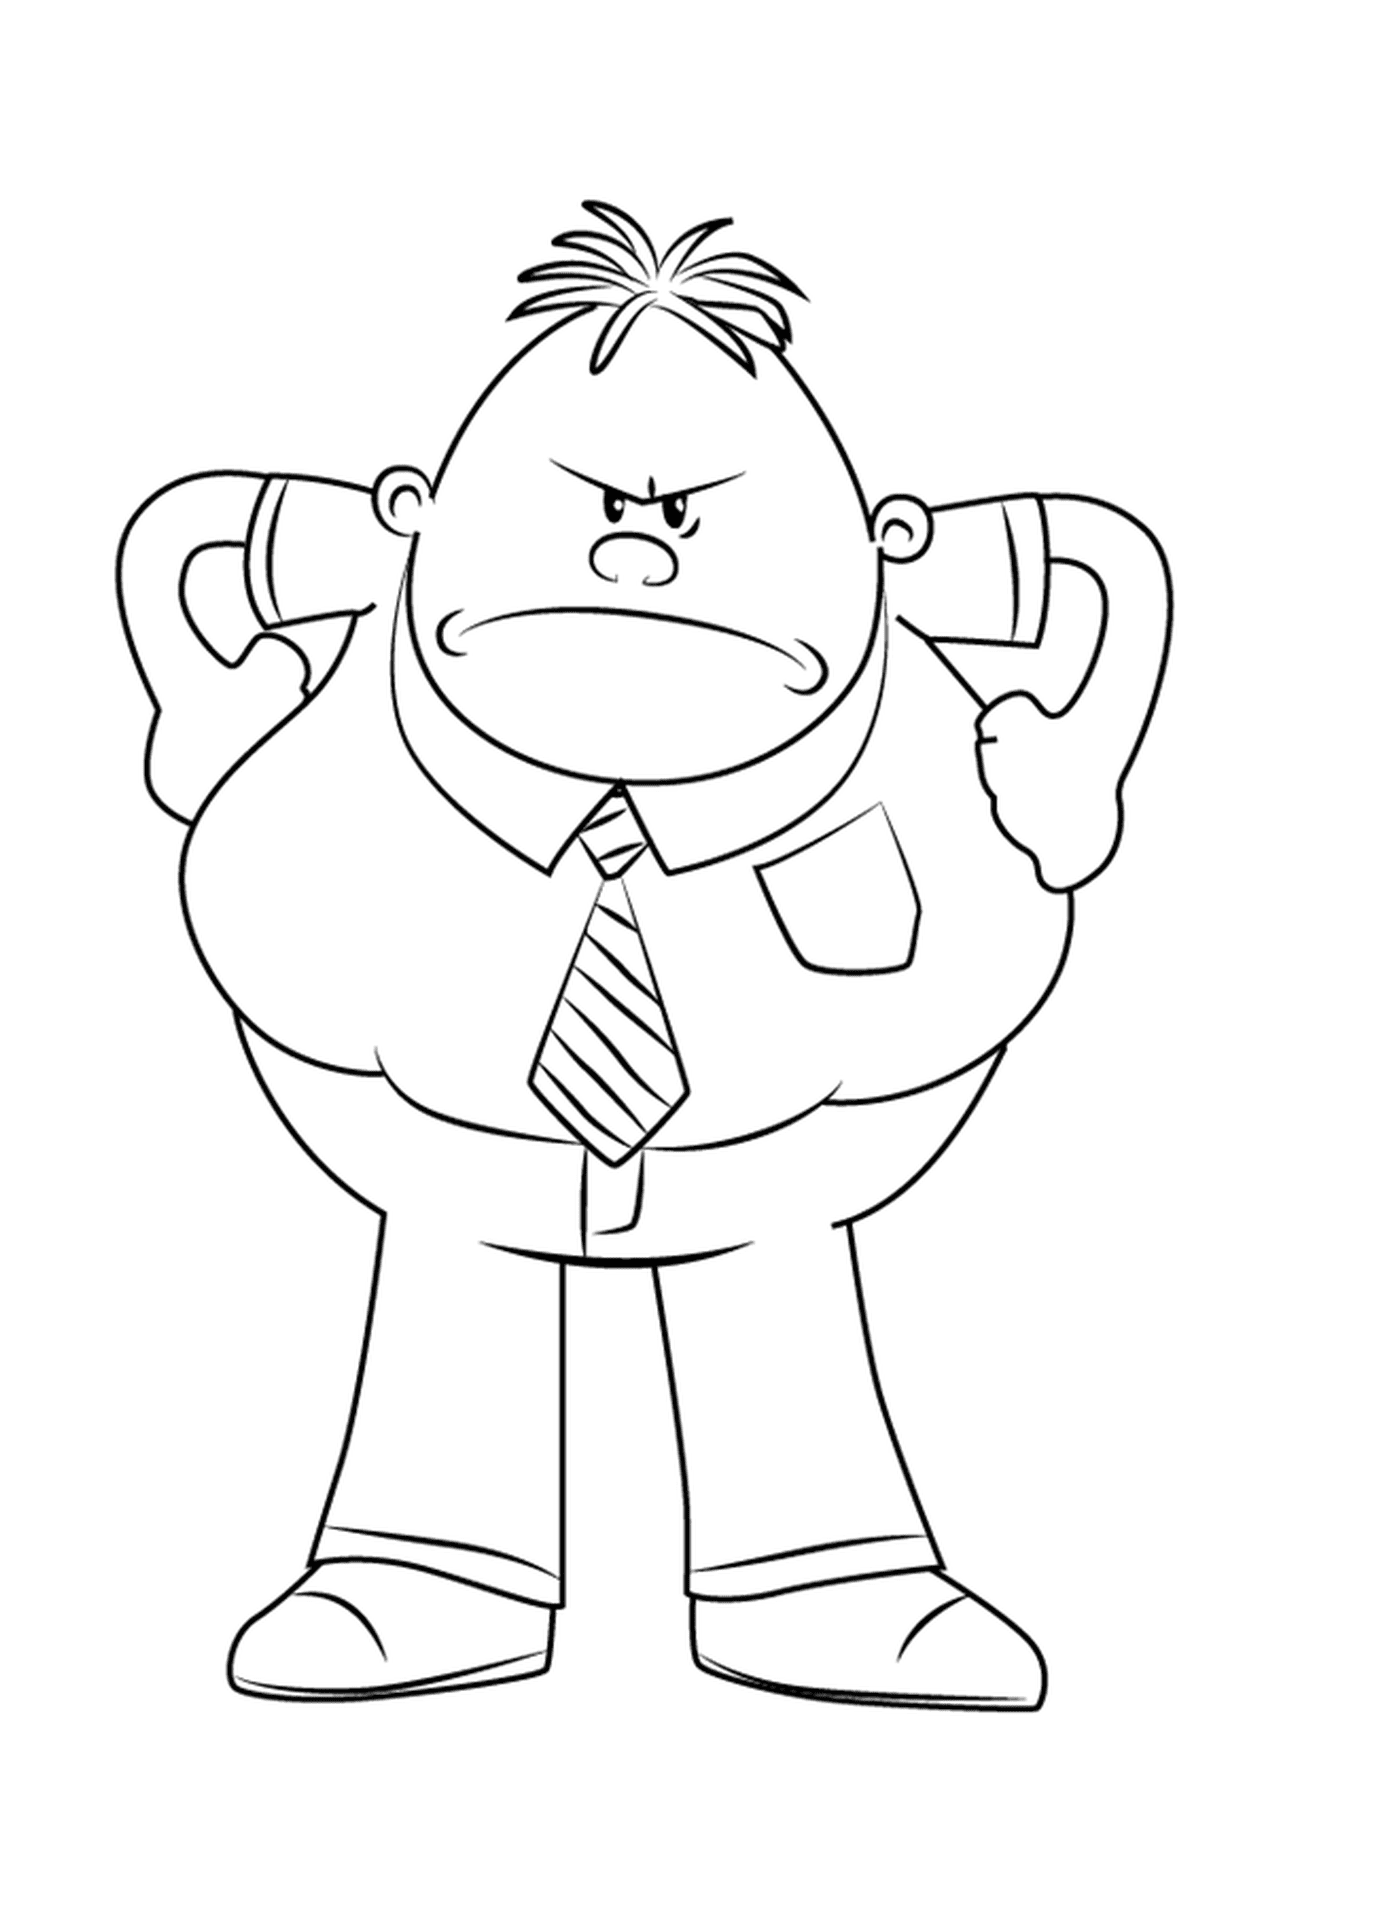 Captain Underpants Coloring Pages: 19 Printable Drawings